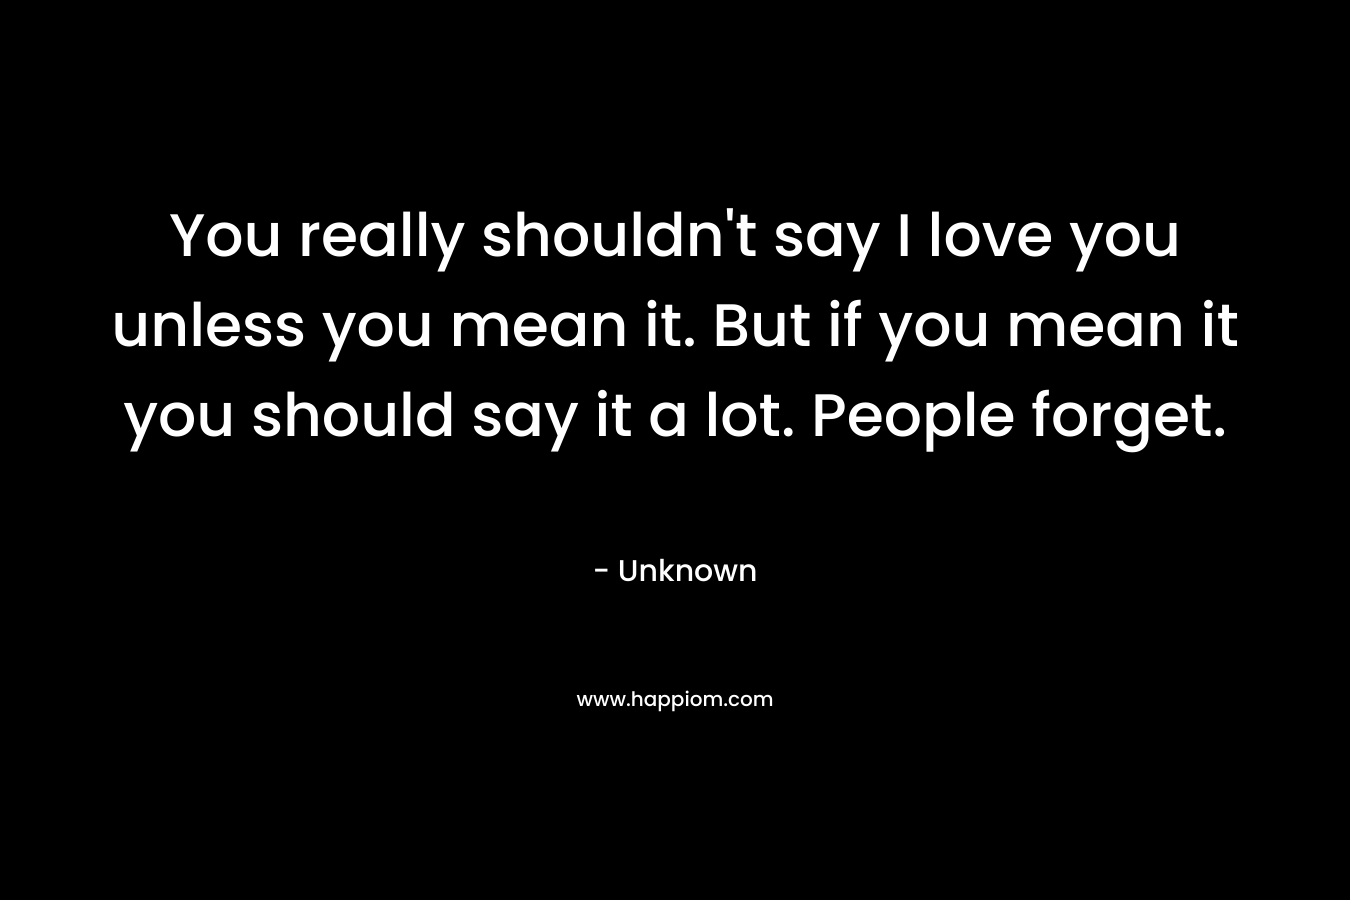 You really shouldn't say I love you unless you mean it. But if you mean it you should say it a lot. People forget.